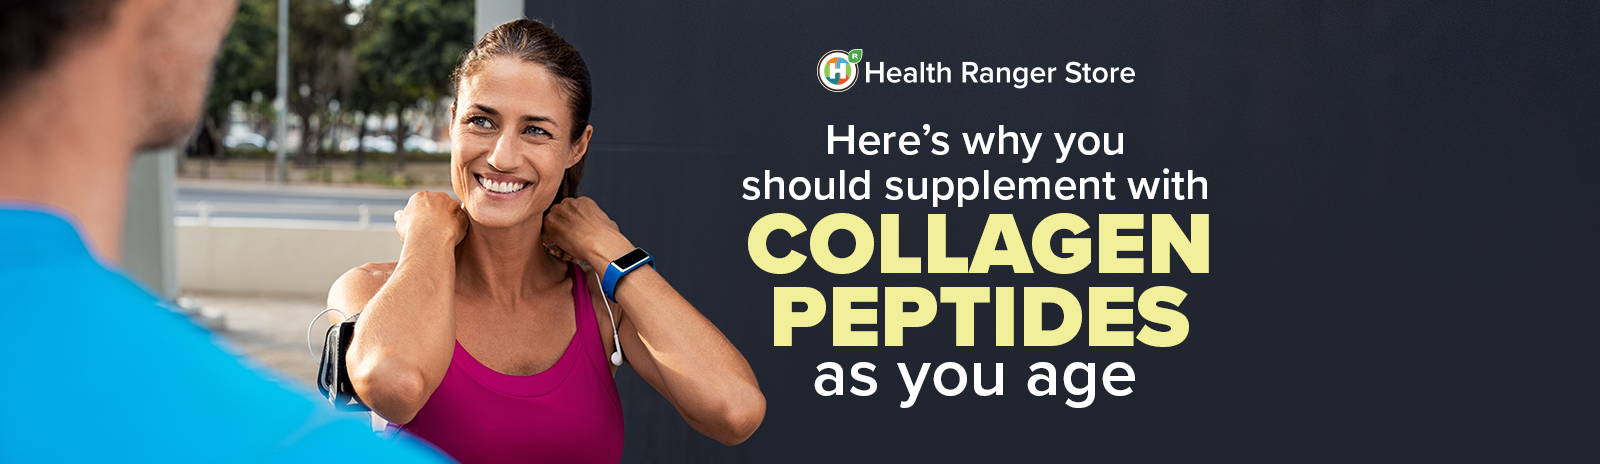 Here’s why you should supplement with collagen peptides as you age